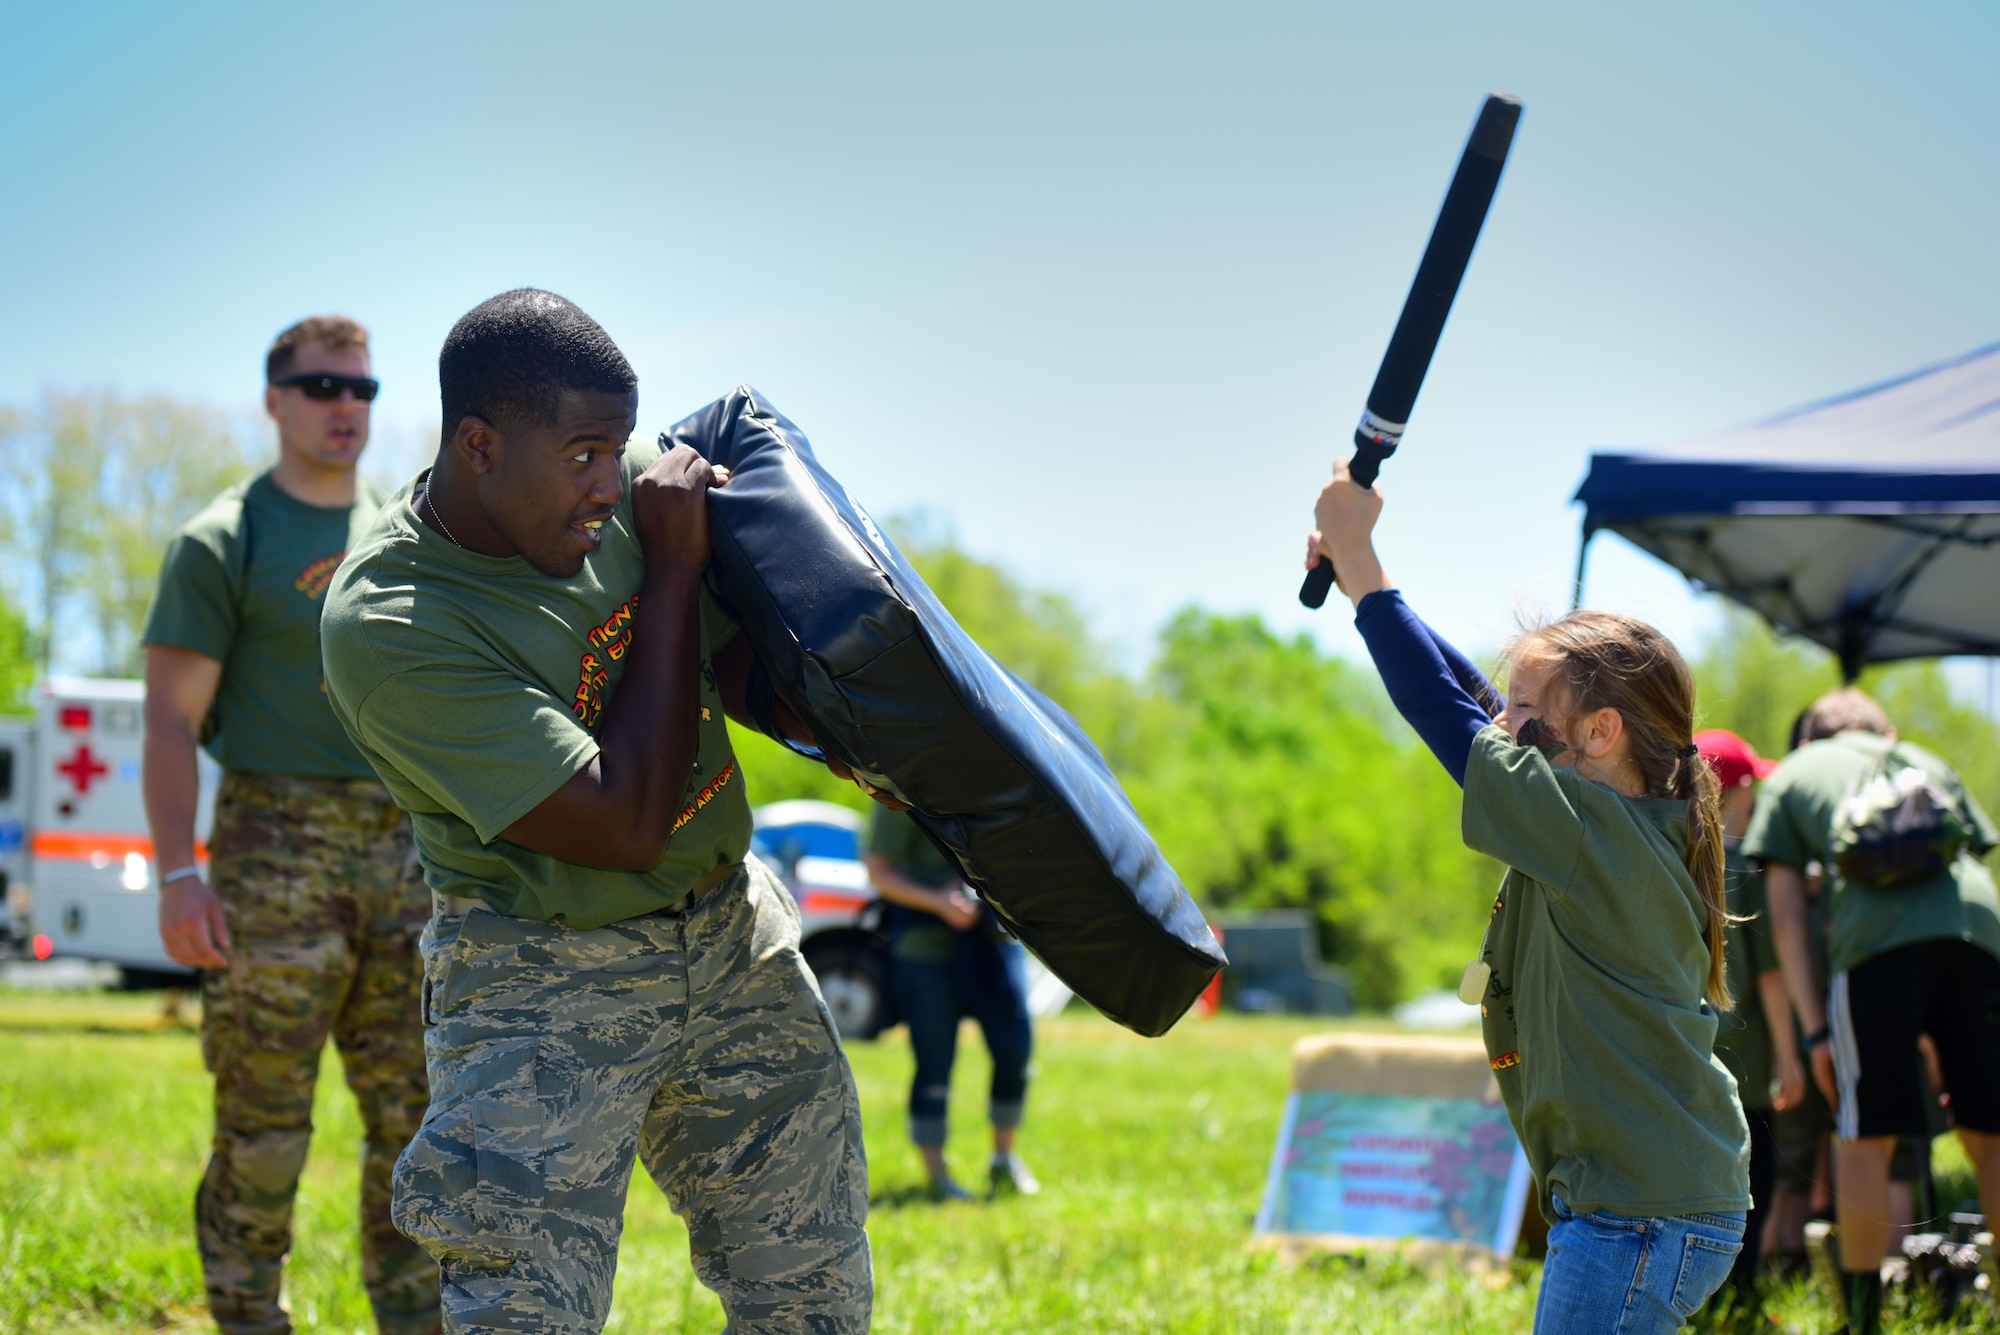 Members of Team Whiteman participate in various activities during a mock deployment, known as Operation Spirit, held at Whiteman Air Force Base, Mo., May 6, 2017. Participants had the opportunity to go through the deployment center line, pose for a photo in front of a B-2 Spirit, and advance to the obstacle course, where they also had the opportunity to get hands-on learning about several units on base. (U.S. Air Force photos by Airman 1st Class Jazmin Smith)